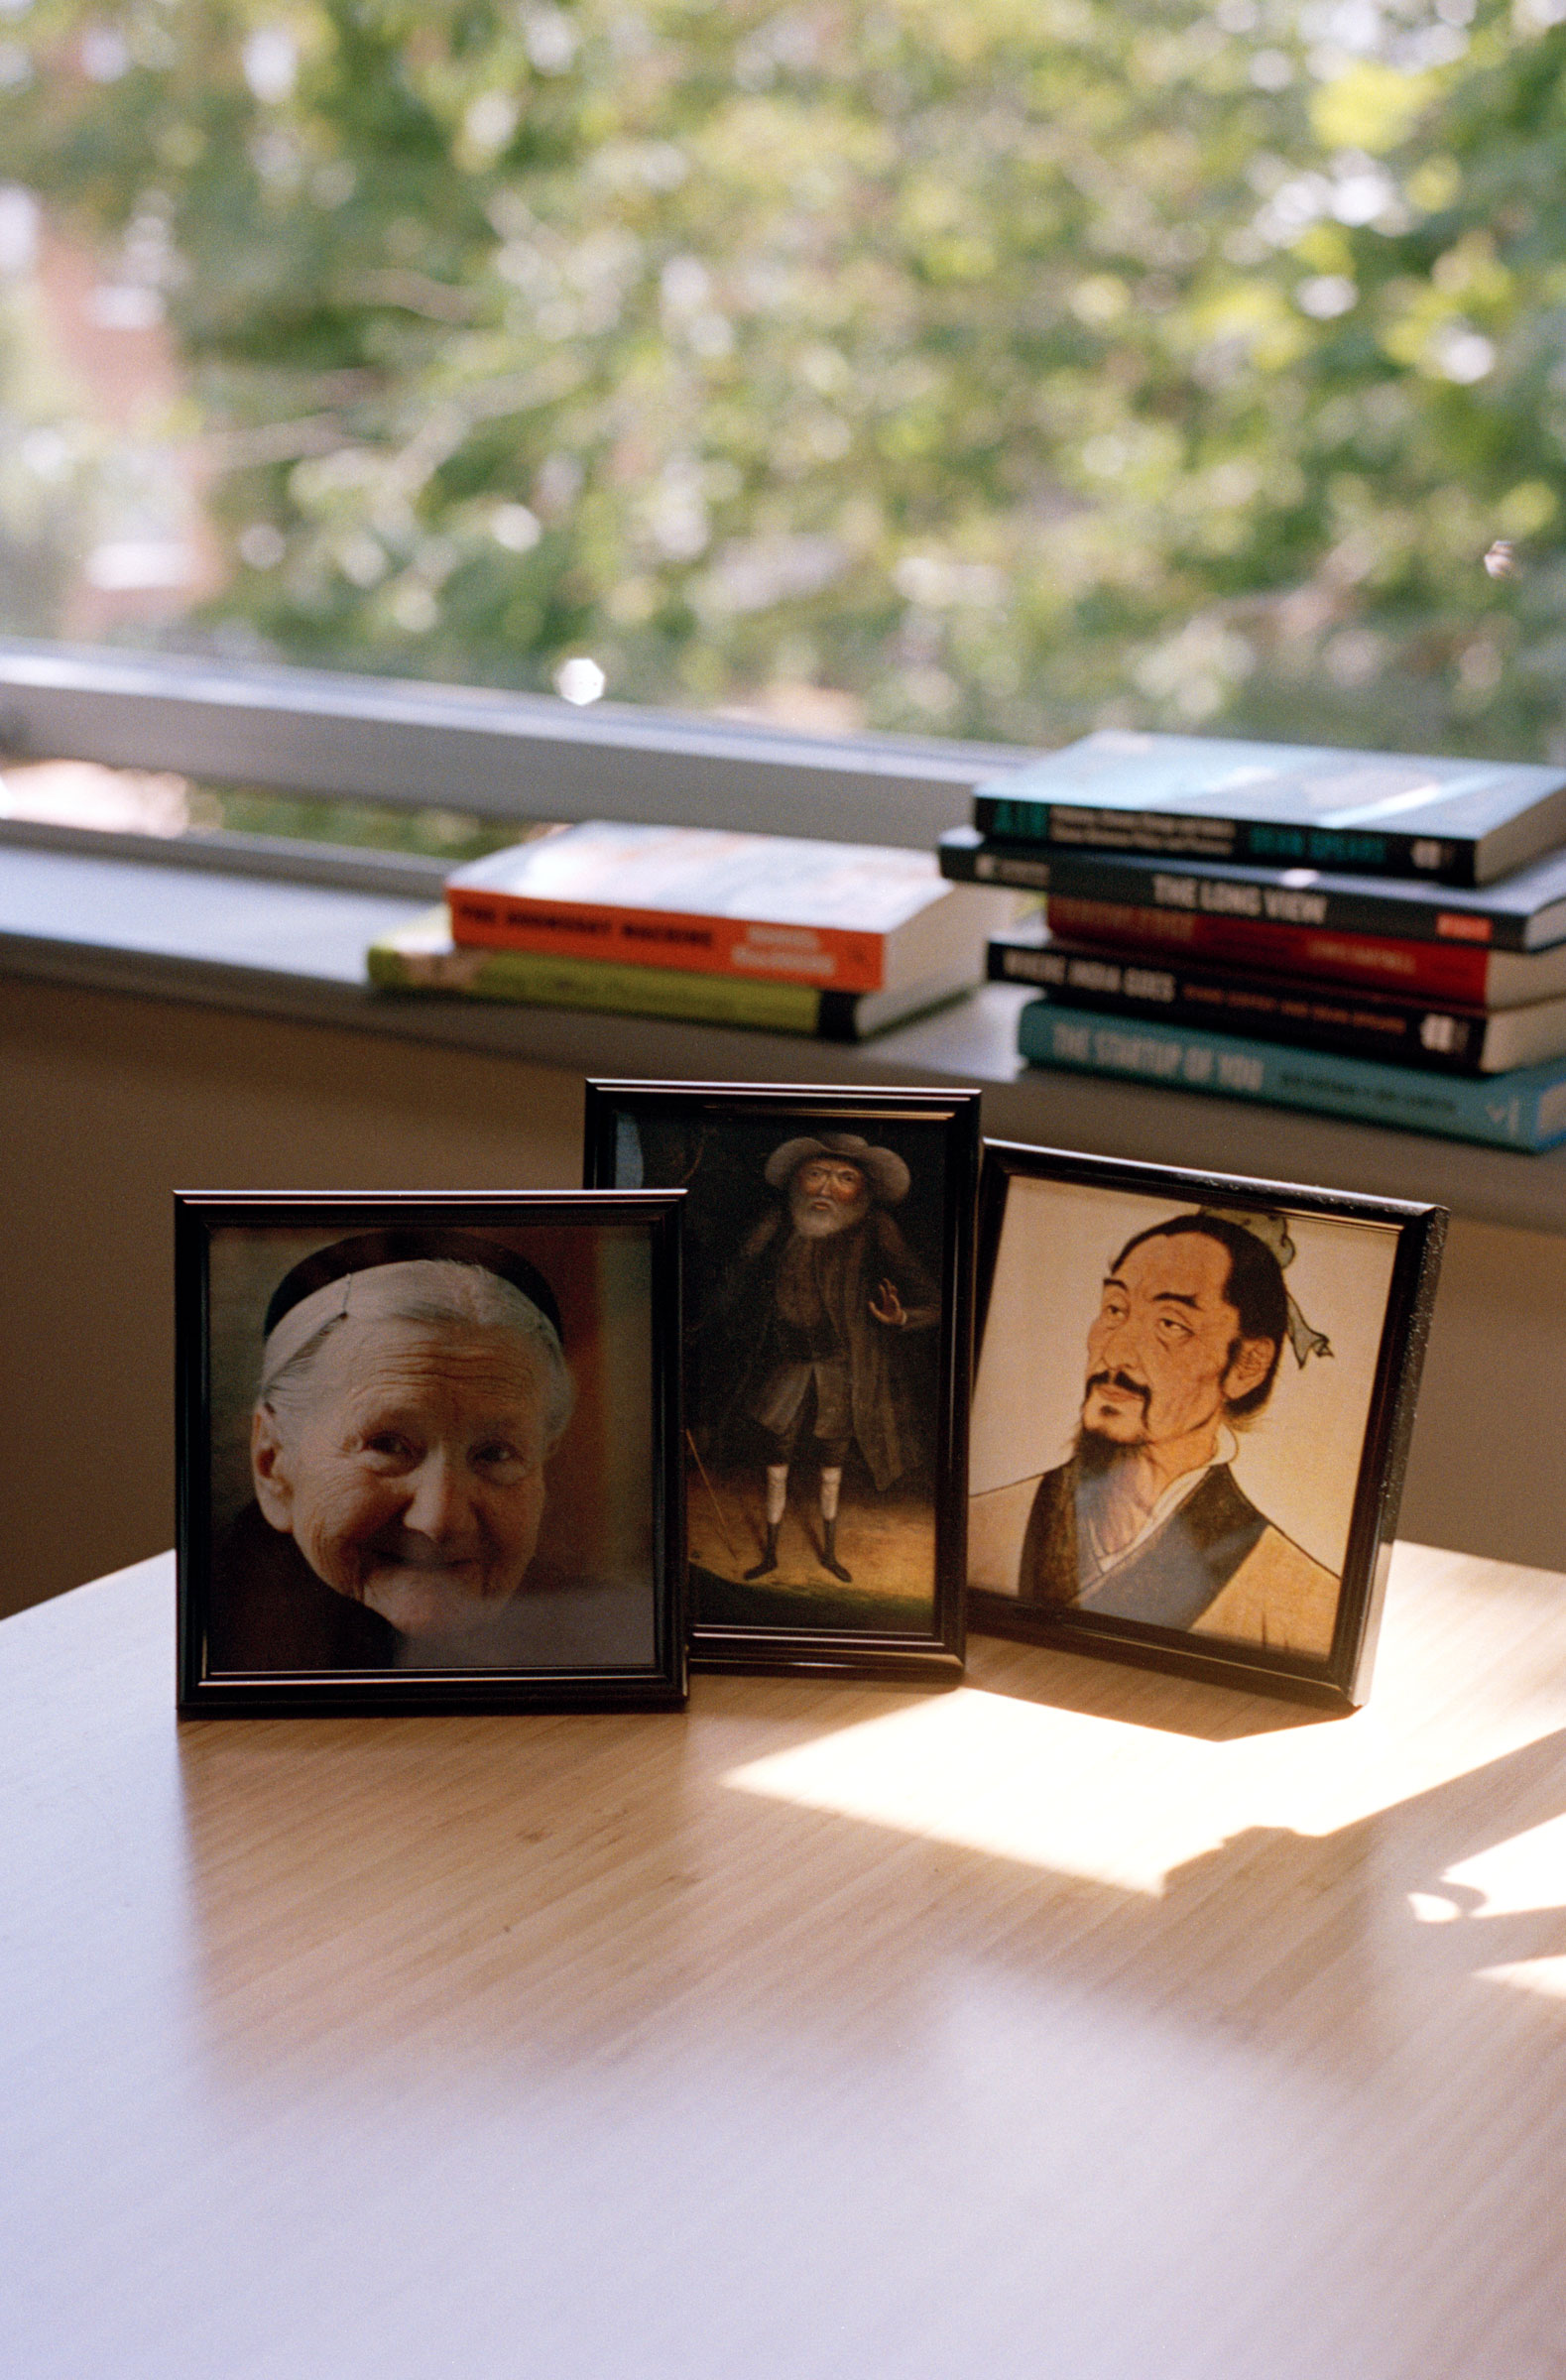 The moral pioneers on MacAskill’s desk: humanitarian Irena Sendler, abolitionist Benjamin Lay, and philosopher Mozi